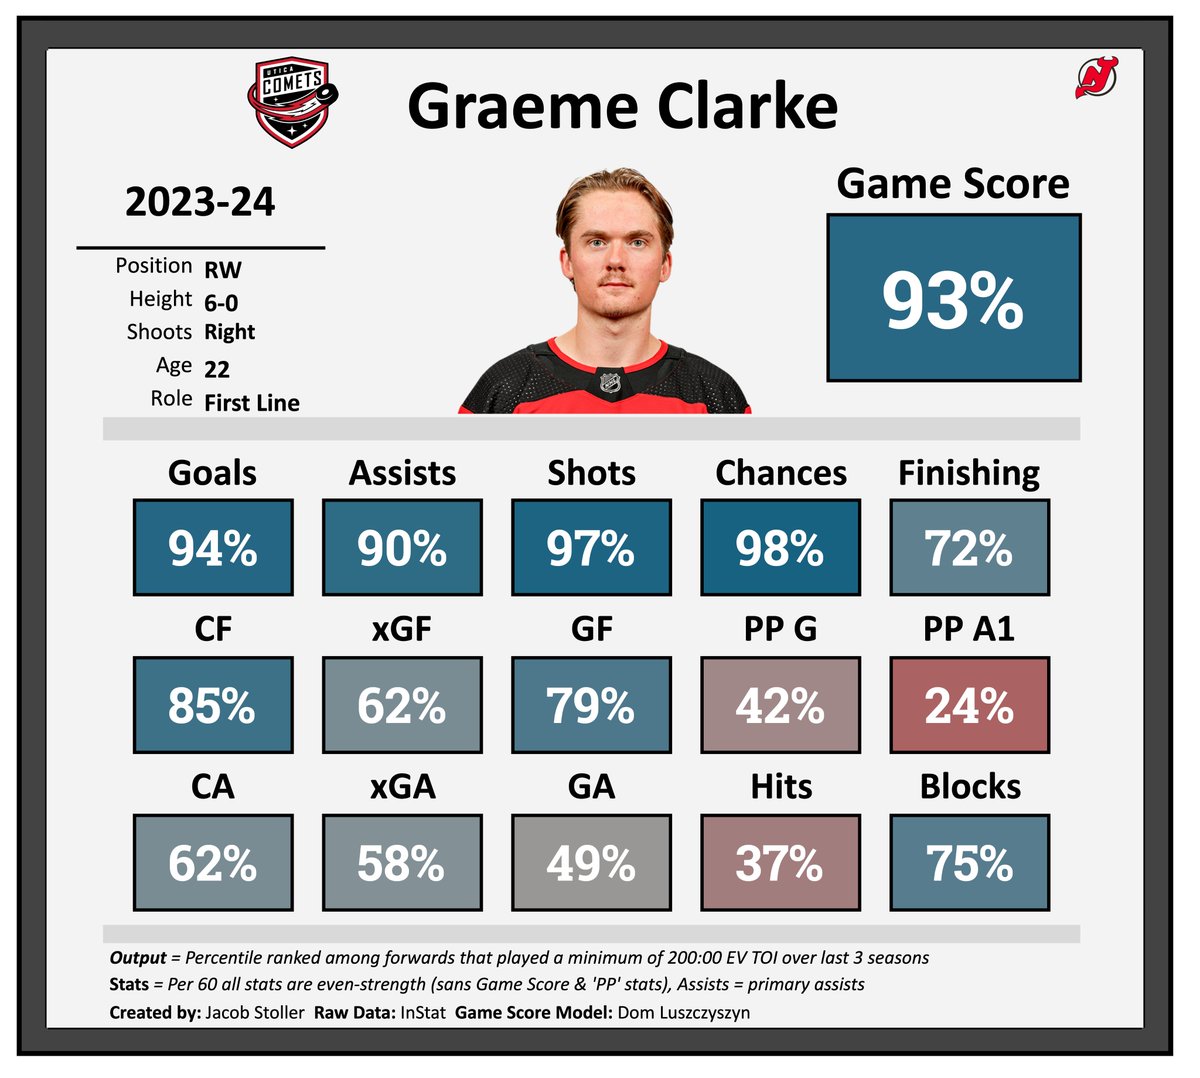 #NJDevils recalled Graeme Clarke. Clarke has been elite at producing even-strength scoring chances at the AHL level over the last 3 years. @TheHockeyNews